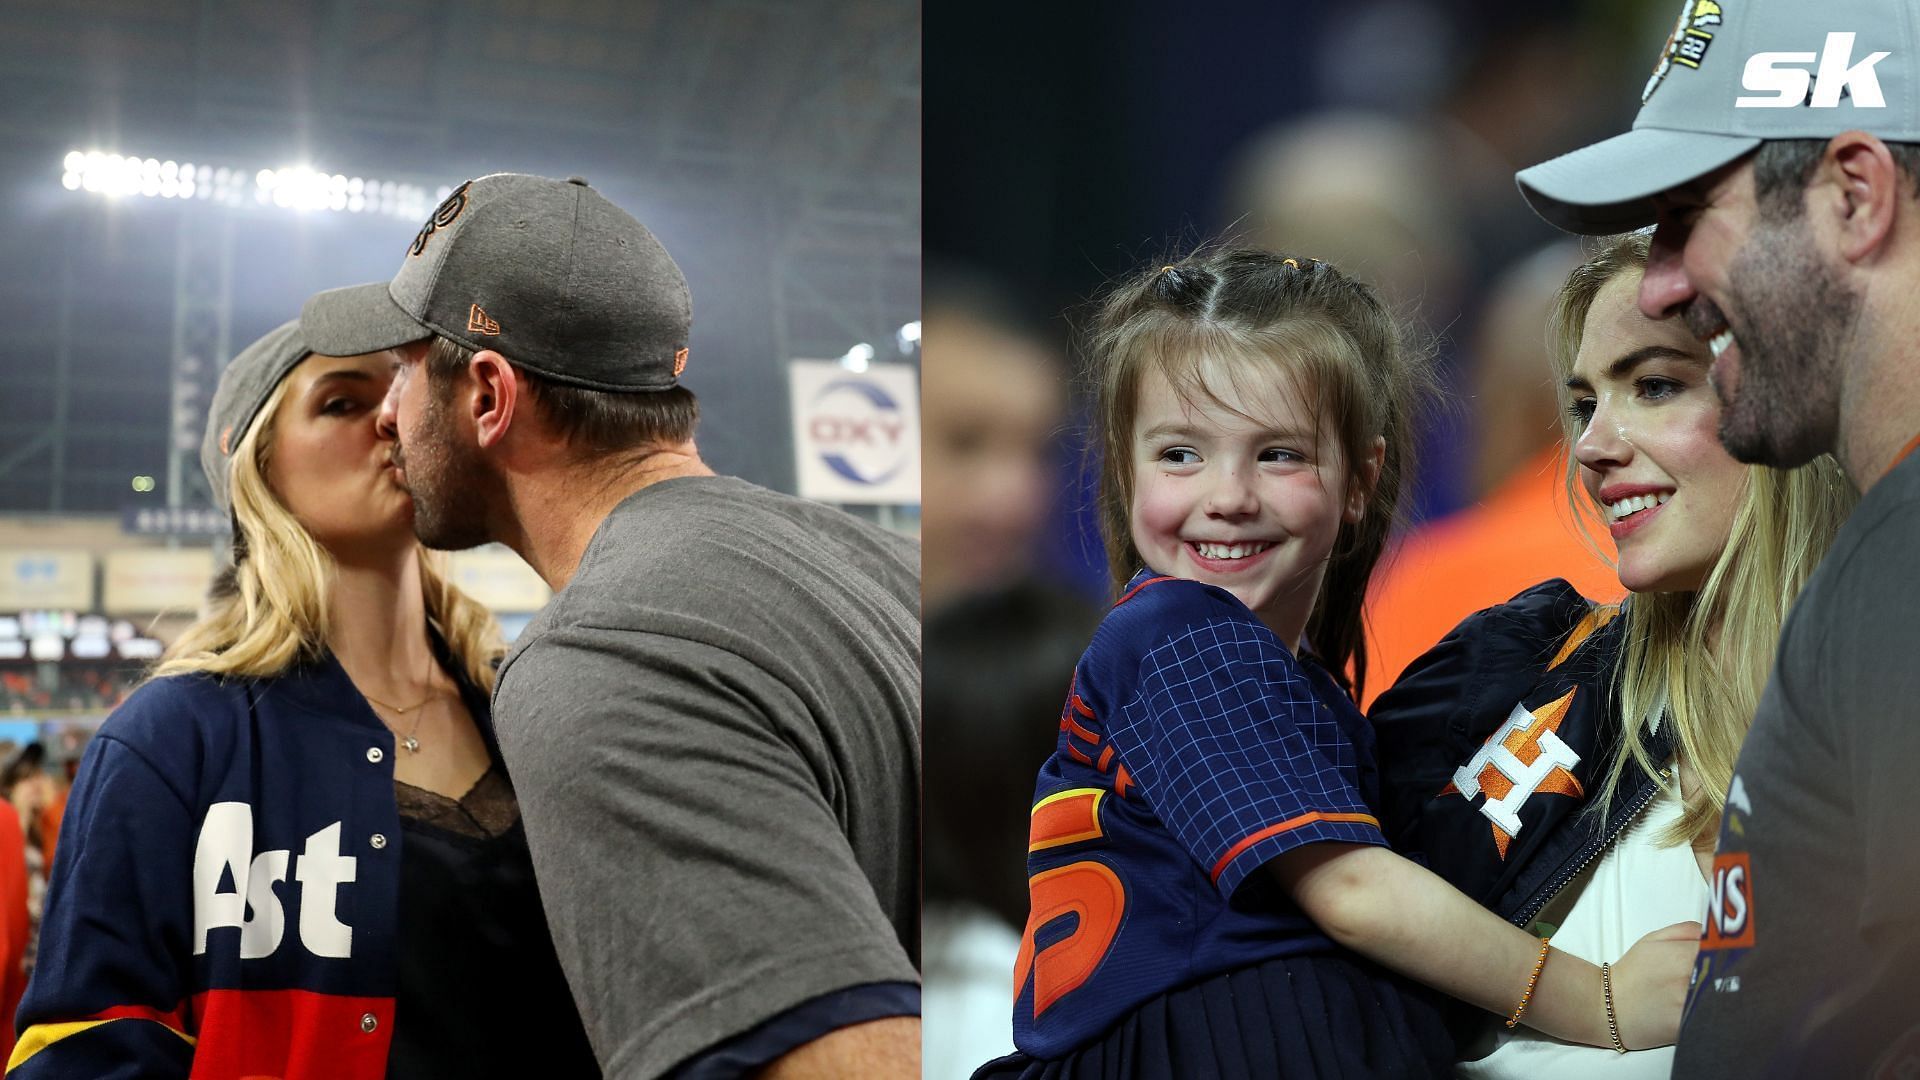 Kate Upton and husband Justin Verlander with their daughter